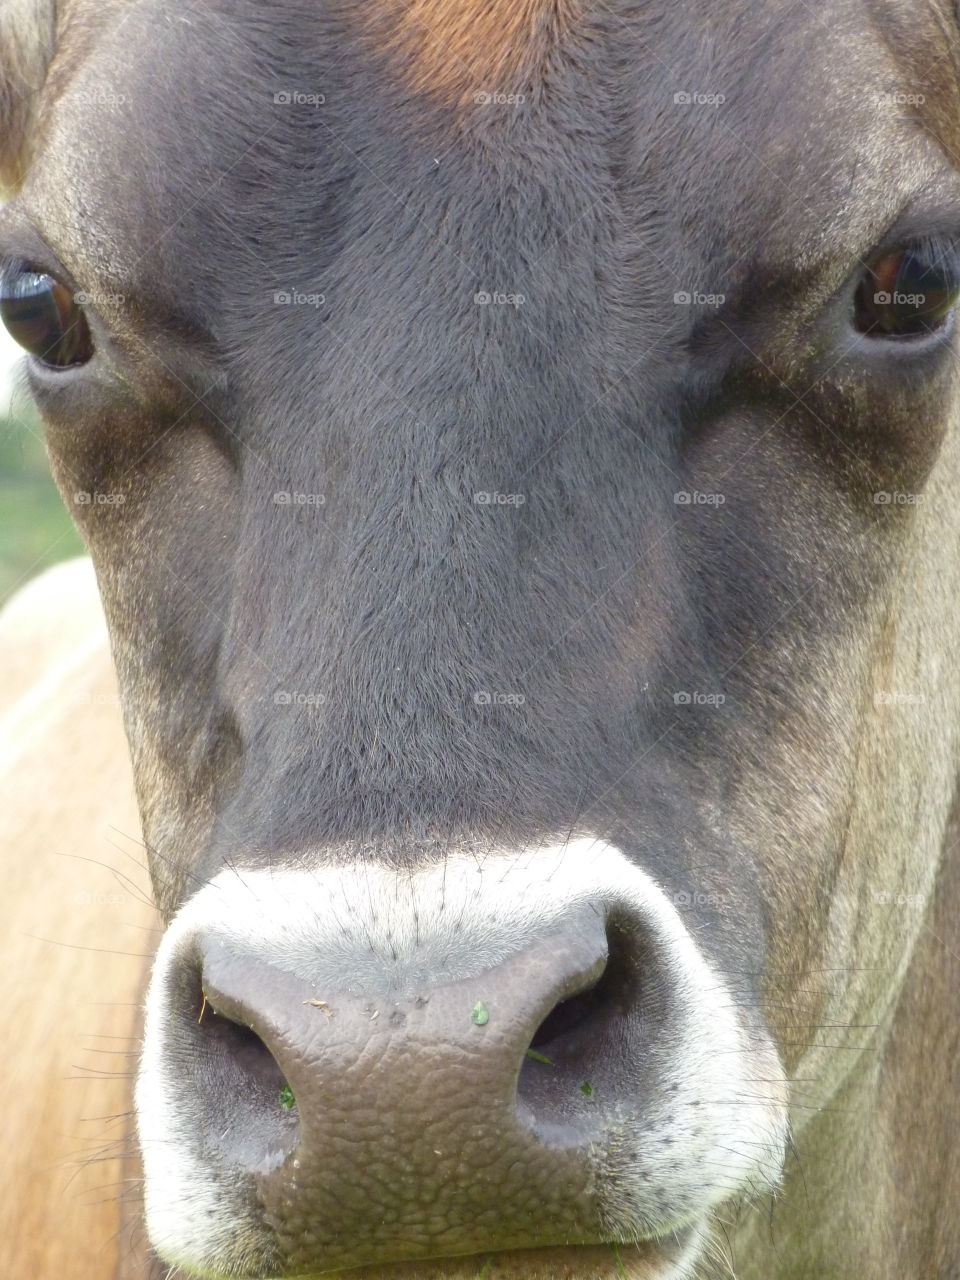 Nosey Cow